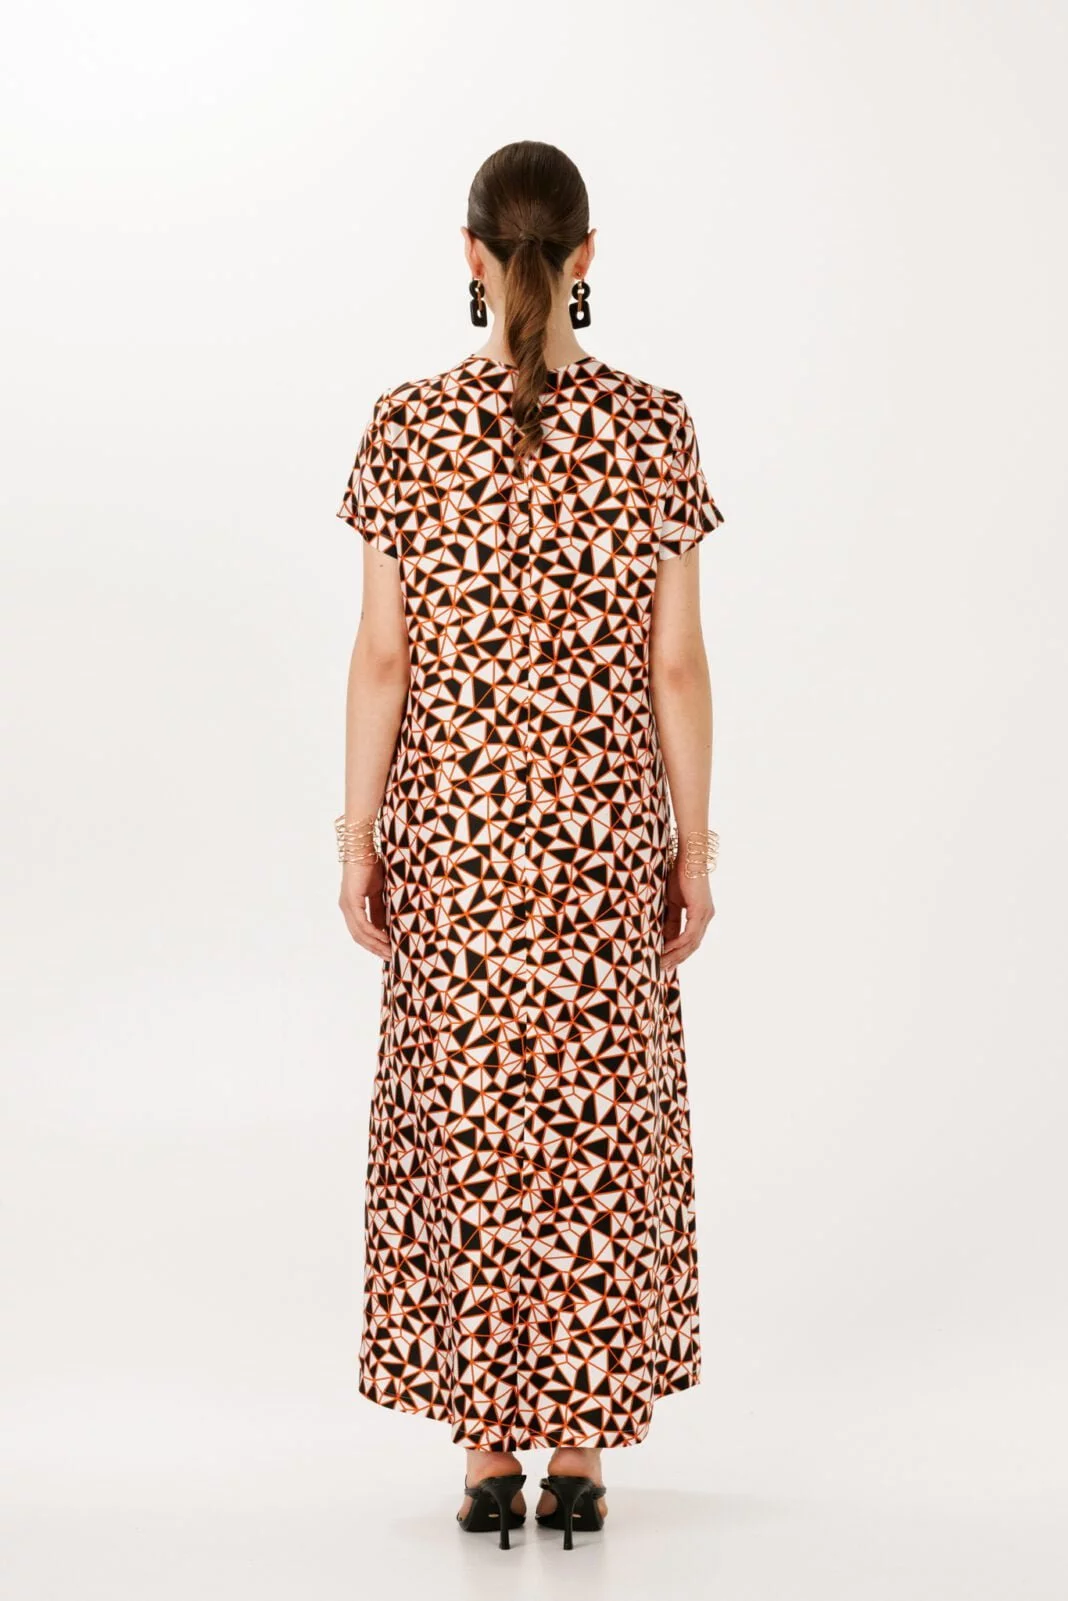 Warm Earthy Tones Maxi Dress - Geometric Print, Short Sleeves for Luxurious Beach Parties and Wedding Guests